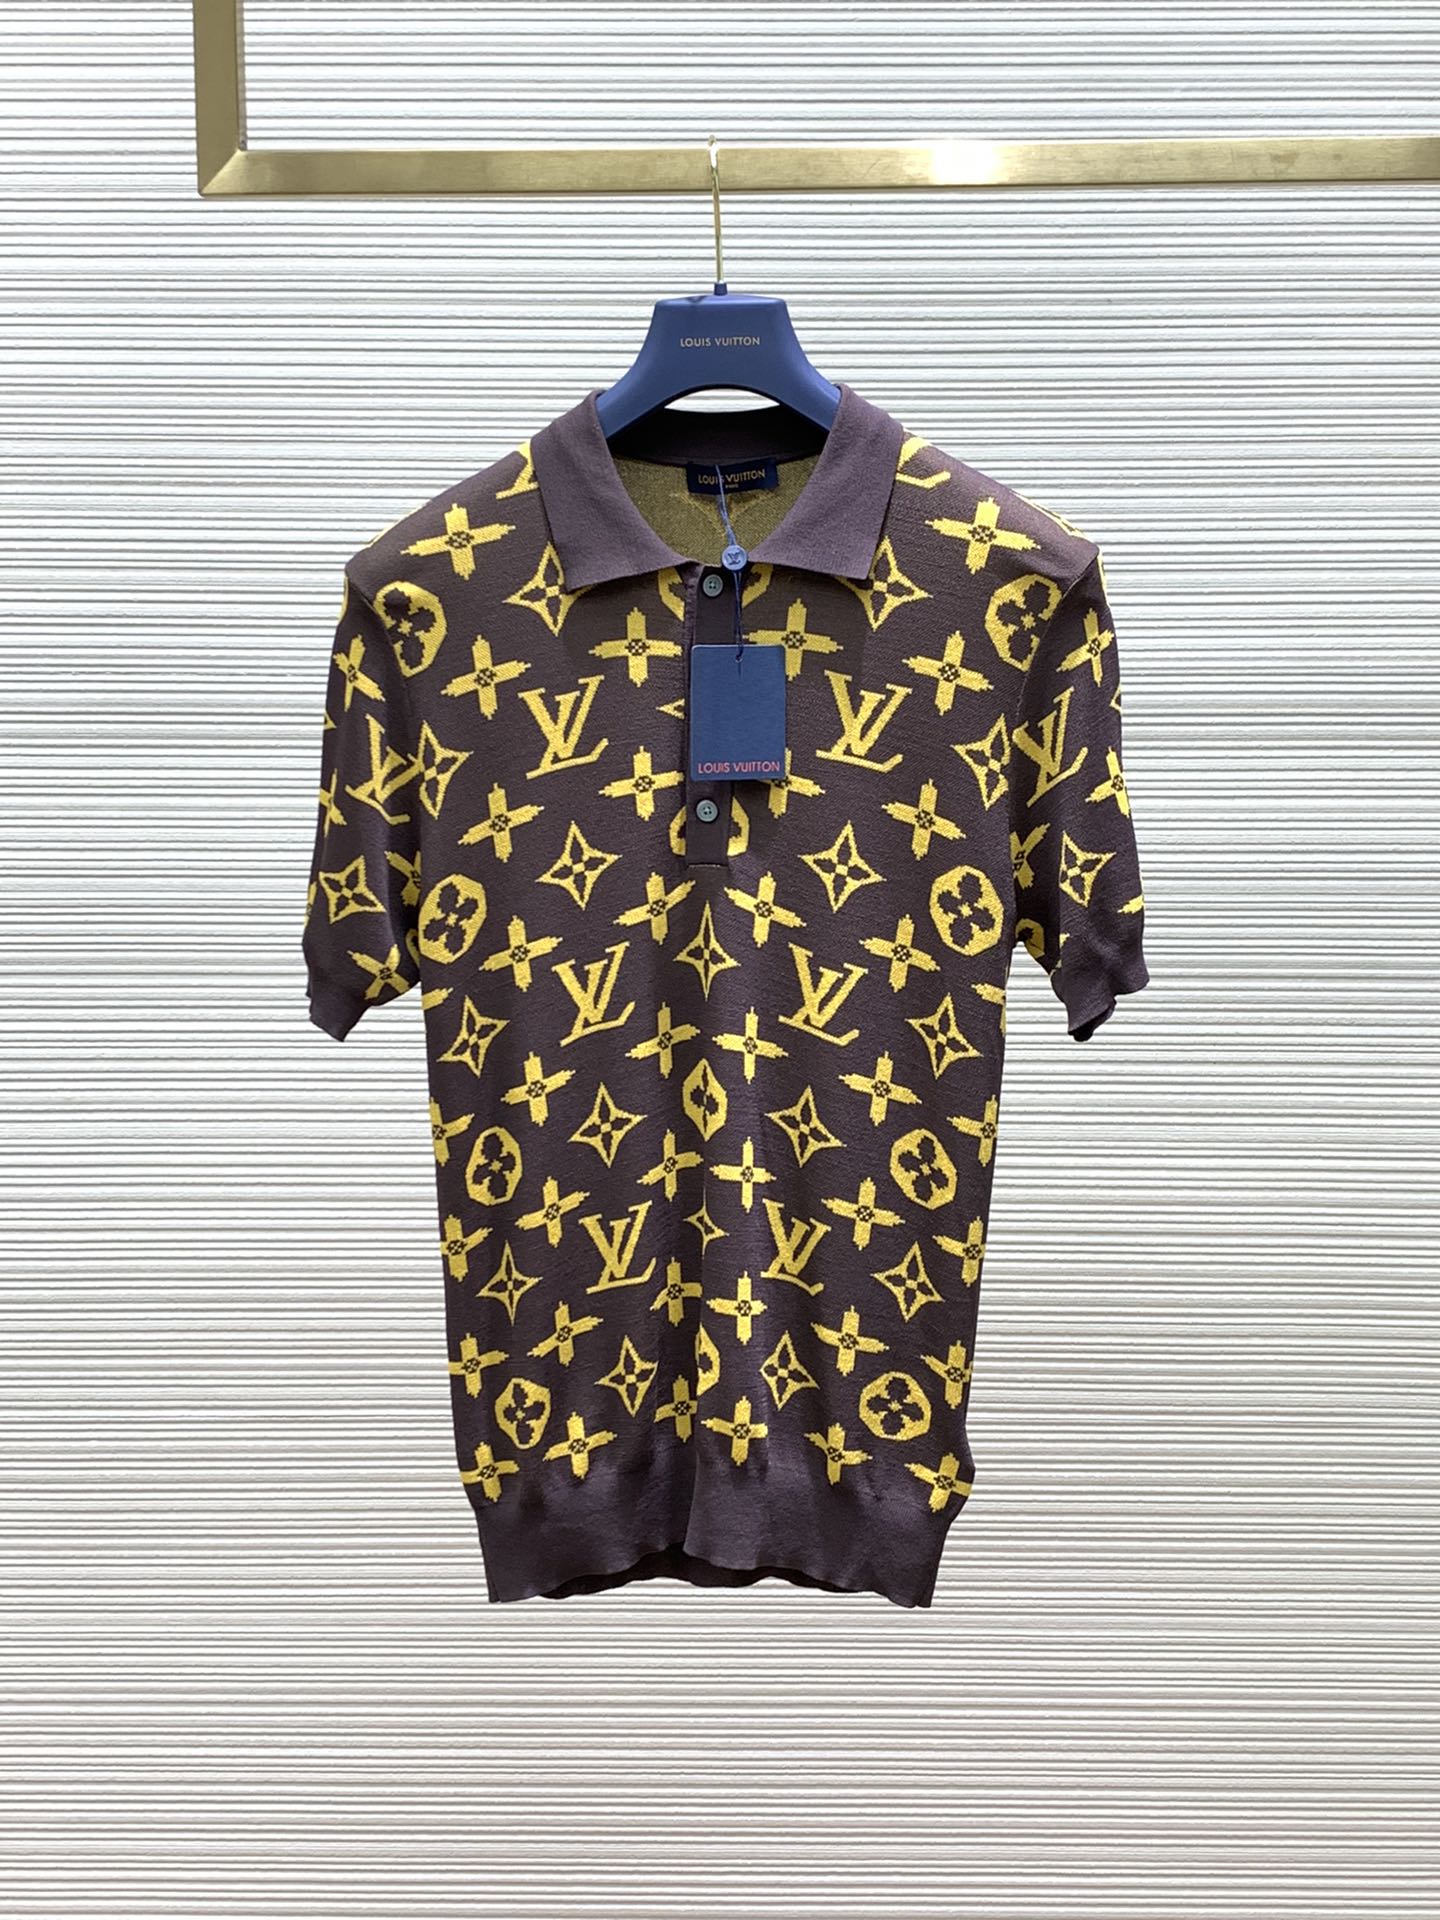 Louis Vuitton Clothing T-Shirt Embroidery Knitting Spring/Summer Collection Fashion Short Sleeve